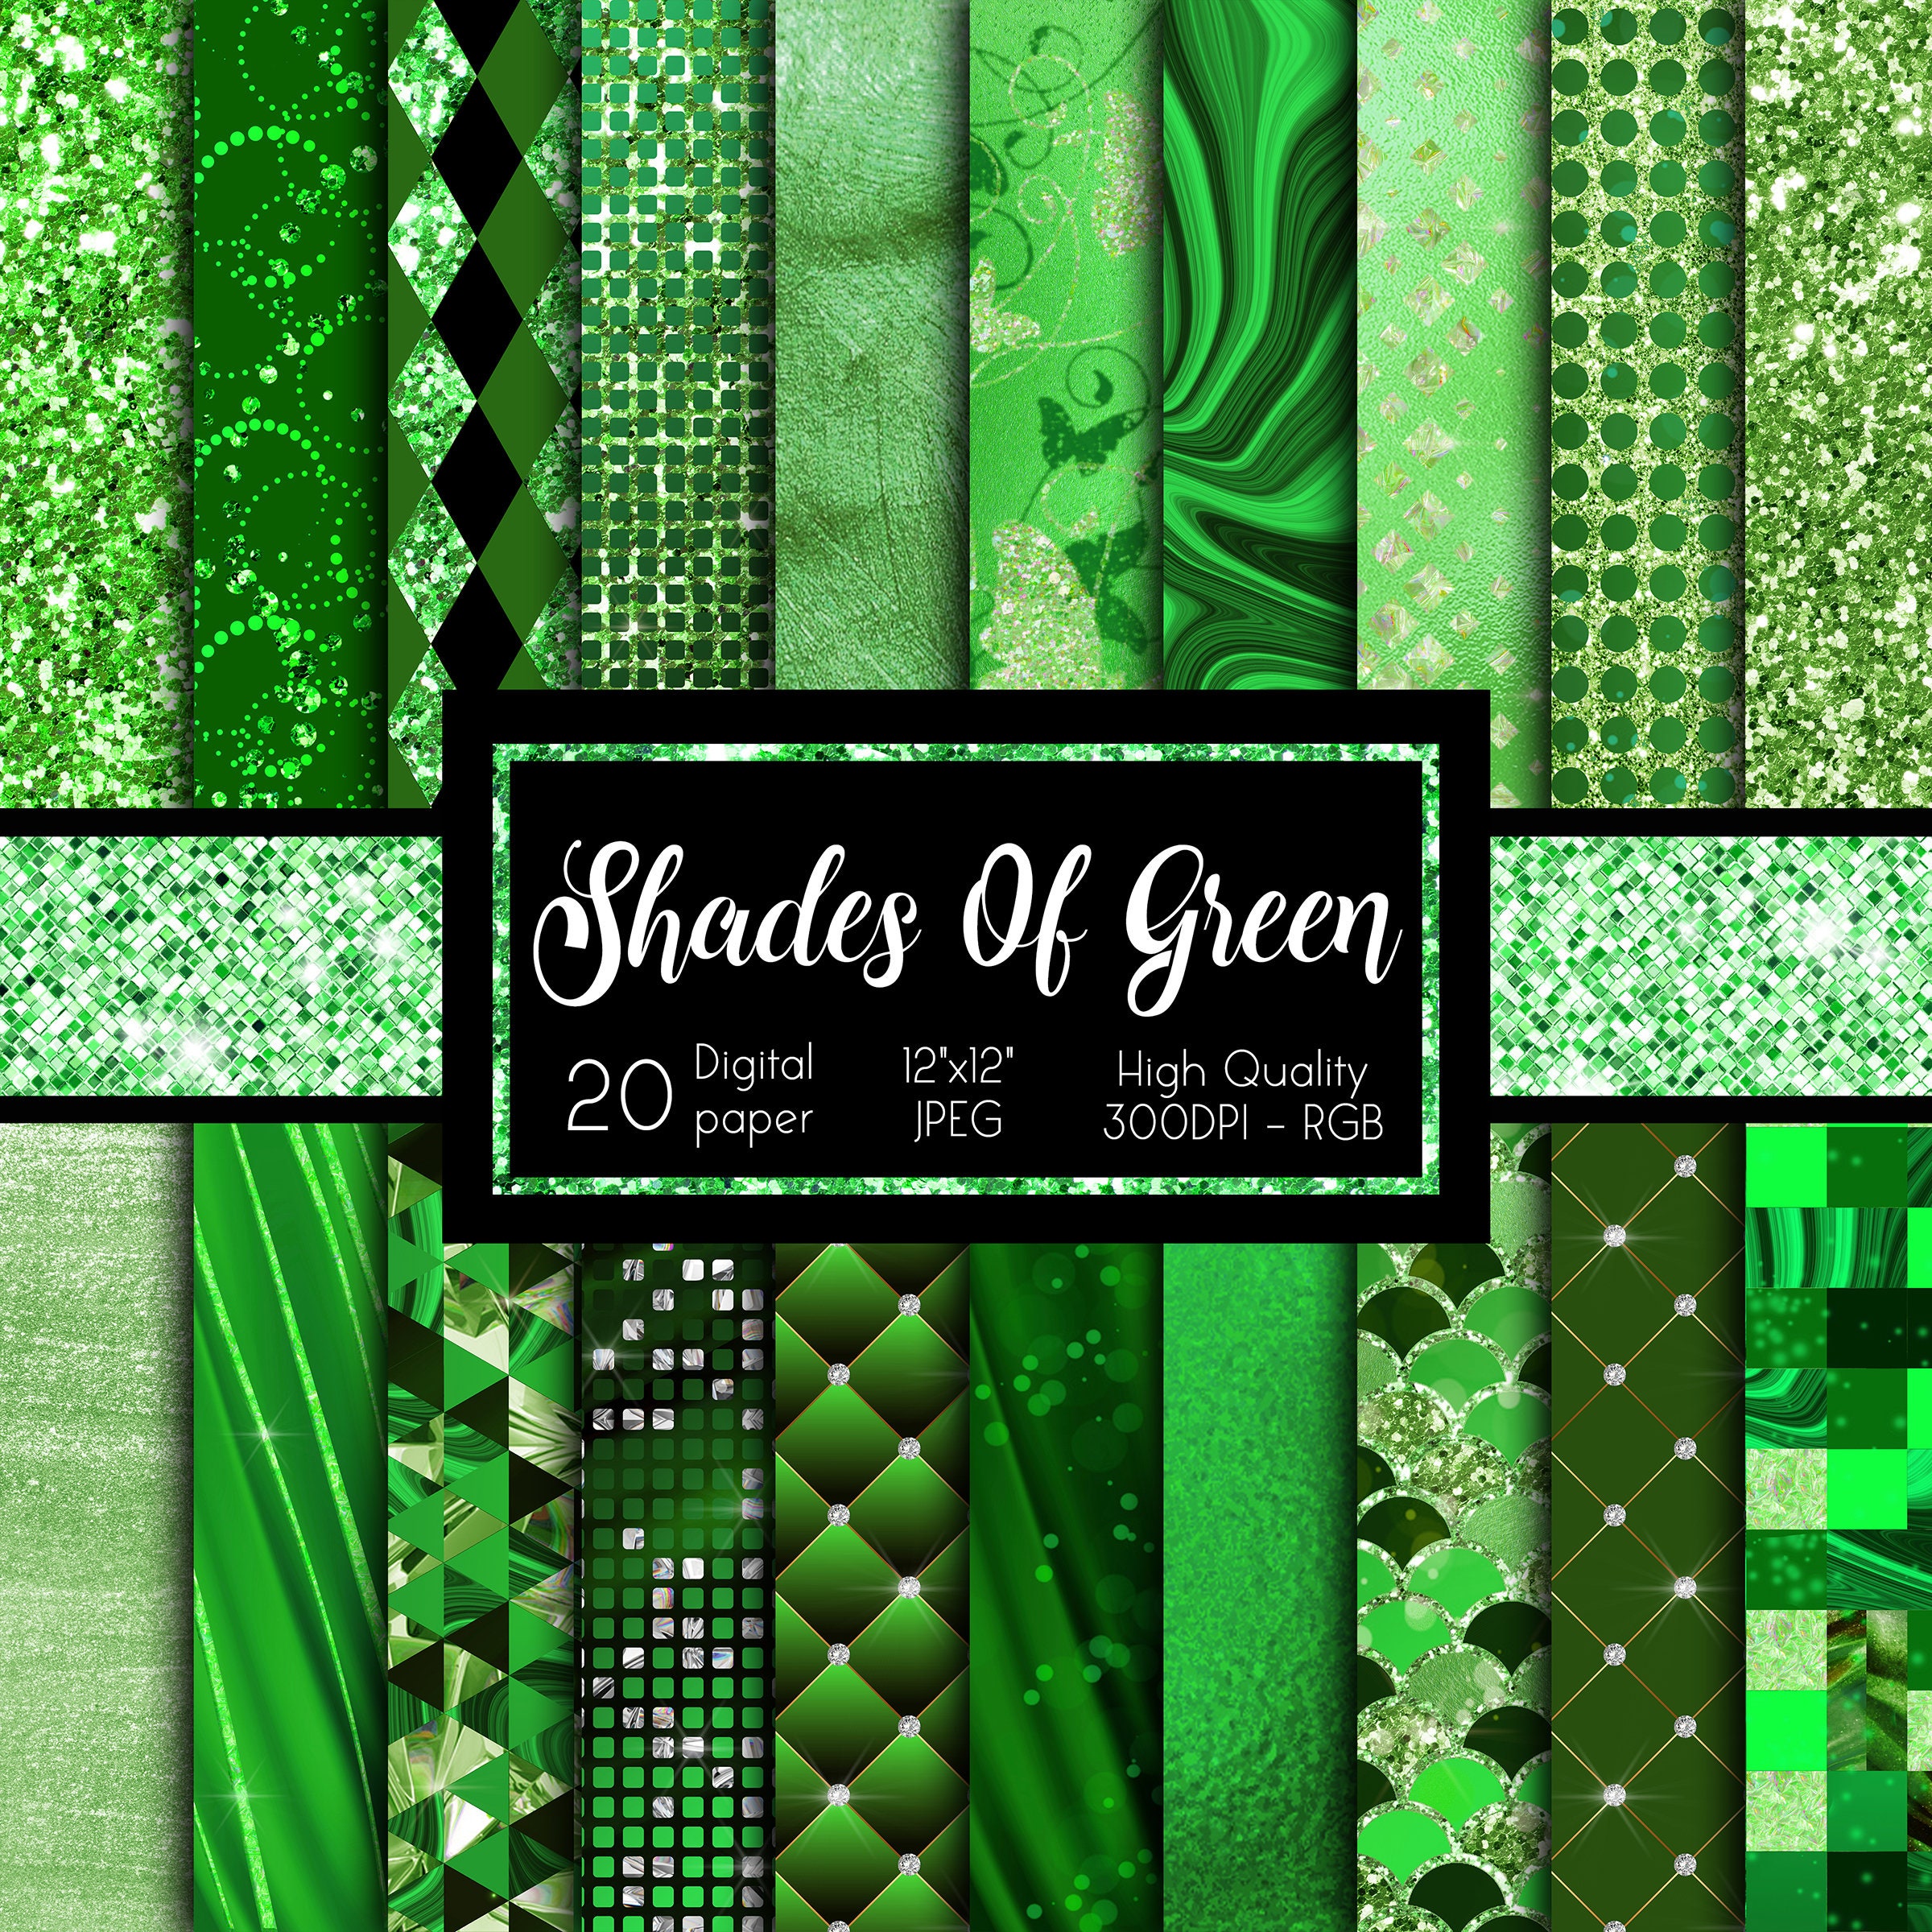 Shades of Green Paper Strips 8 Colors for Making Moravian German